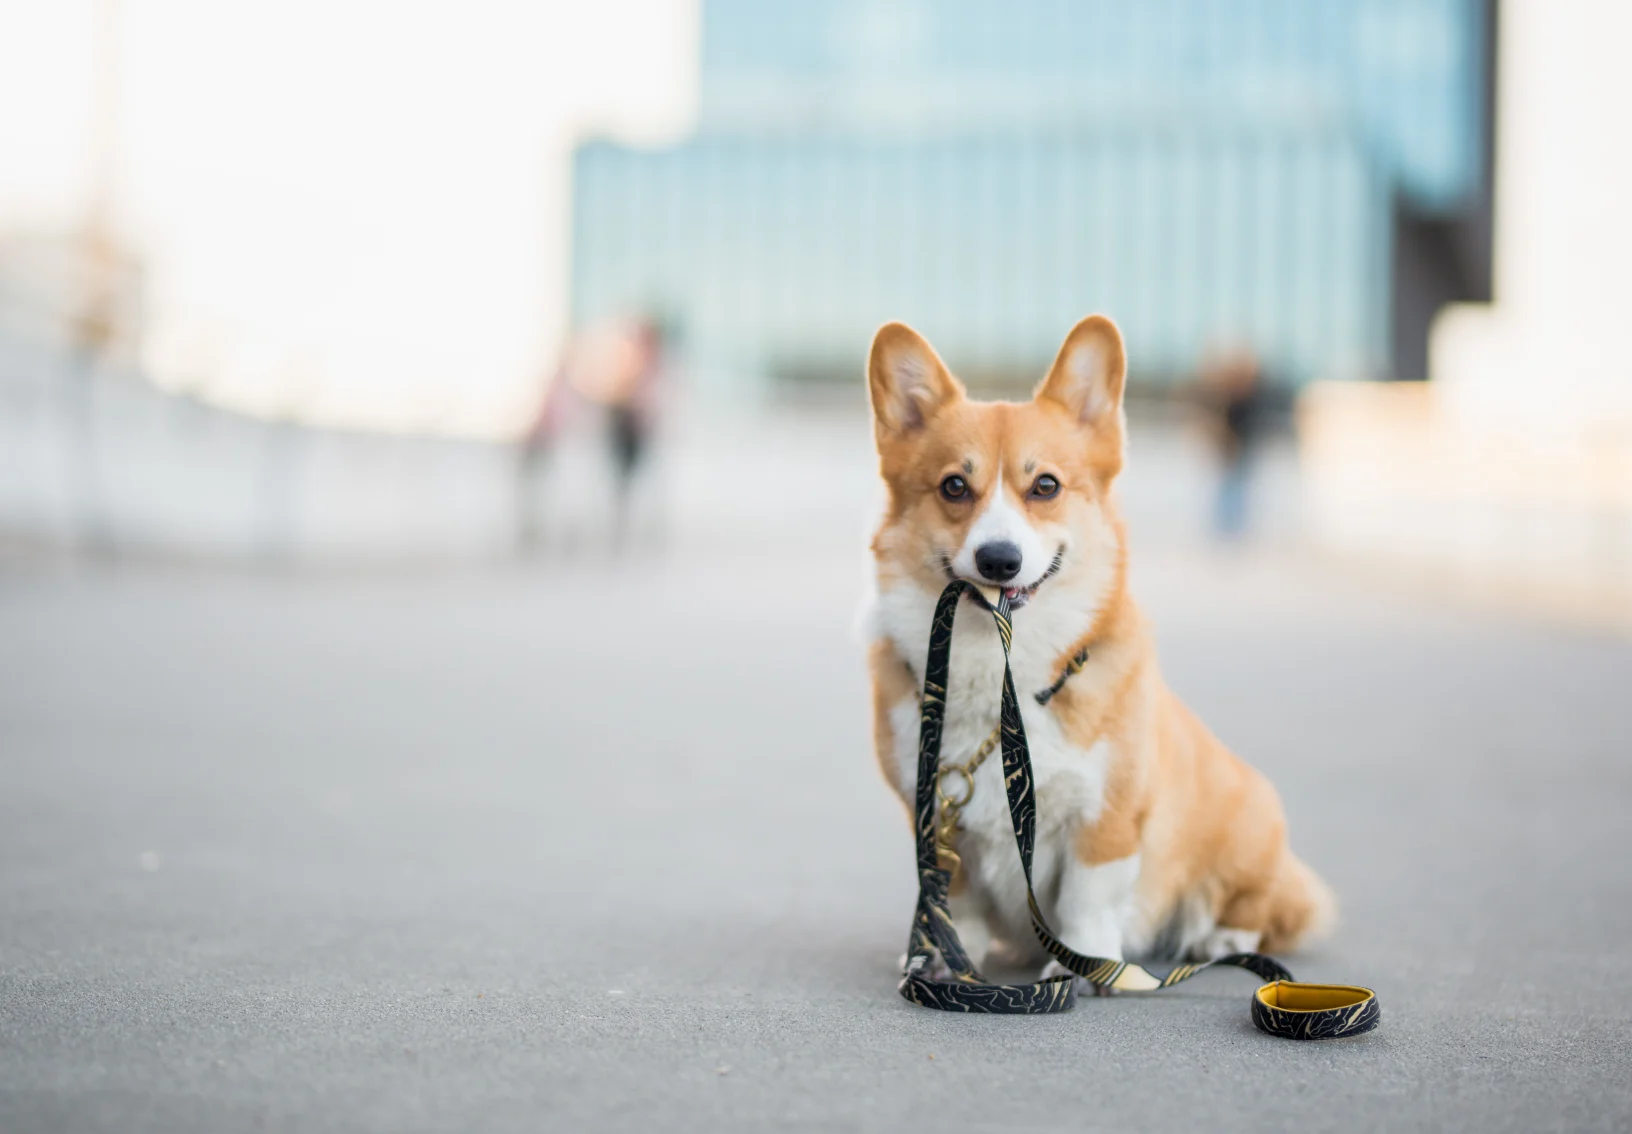 Corgi waiting with a leash in its mouth